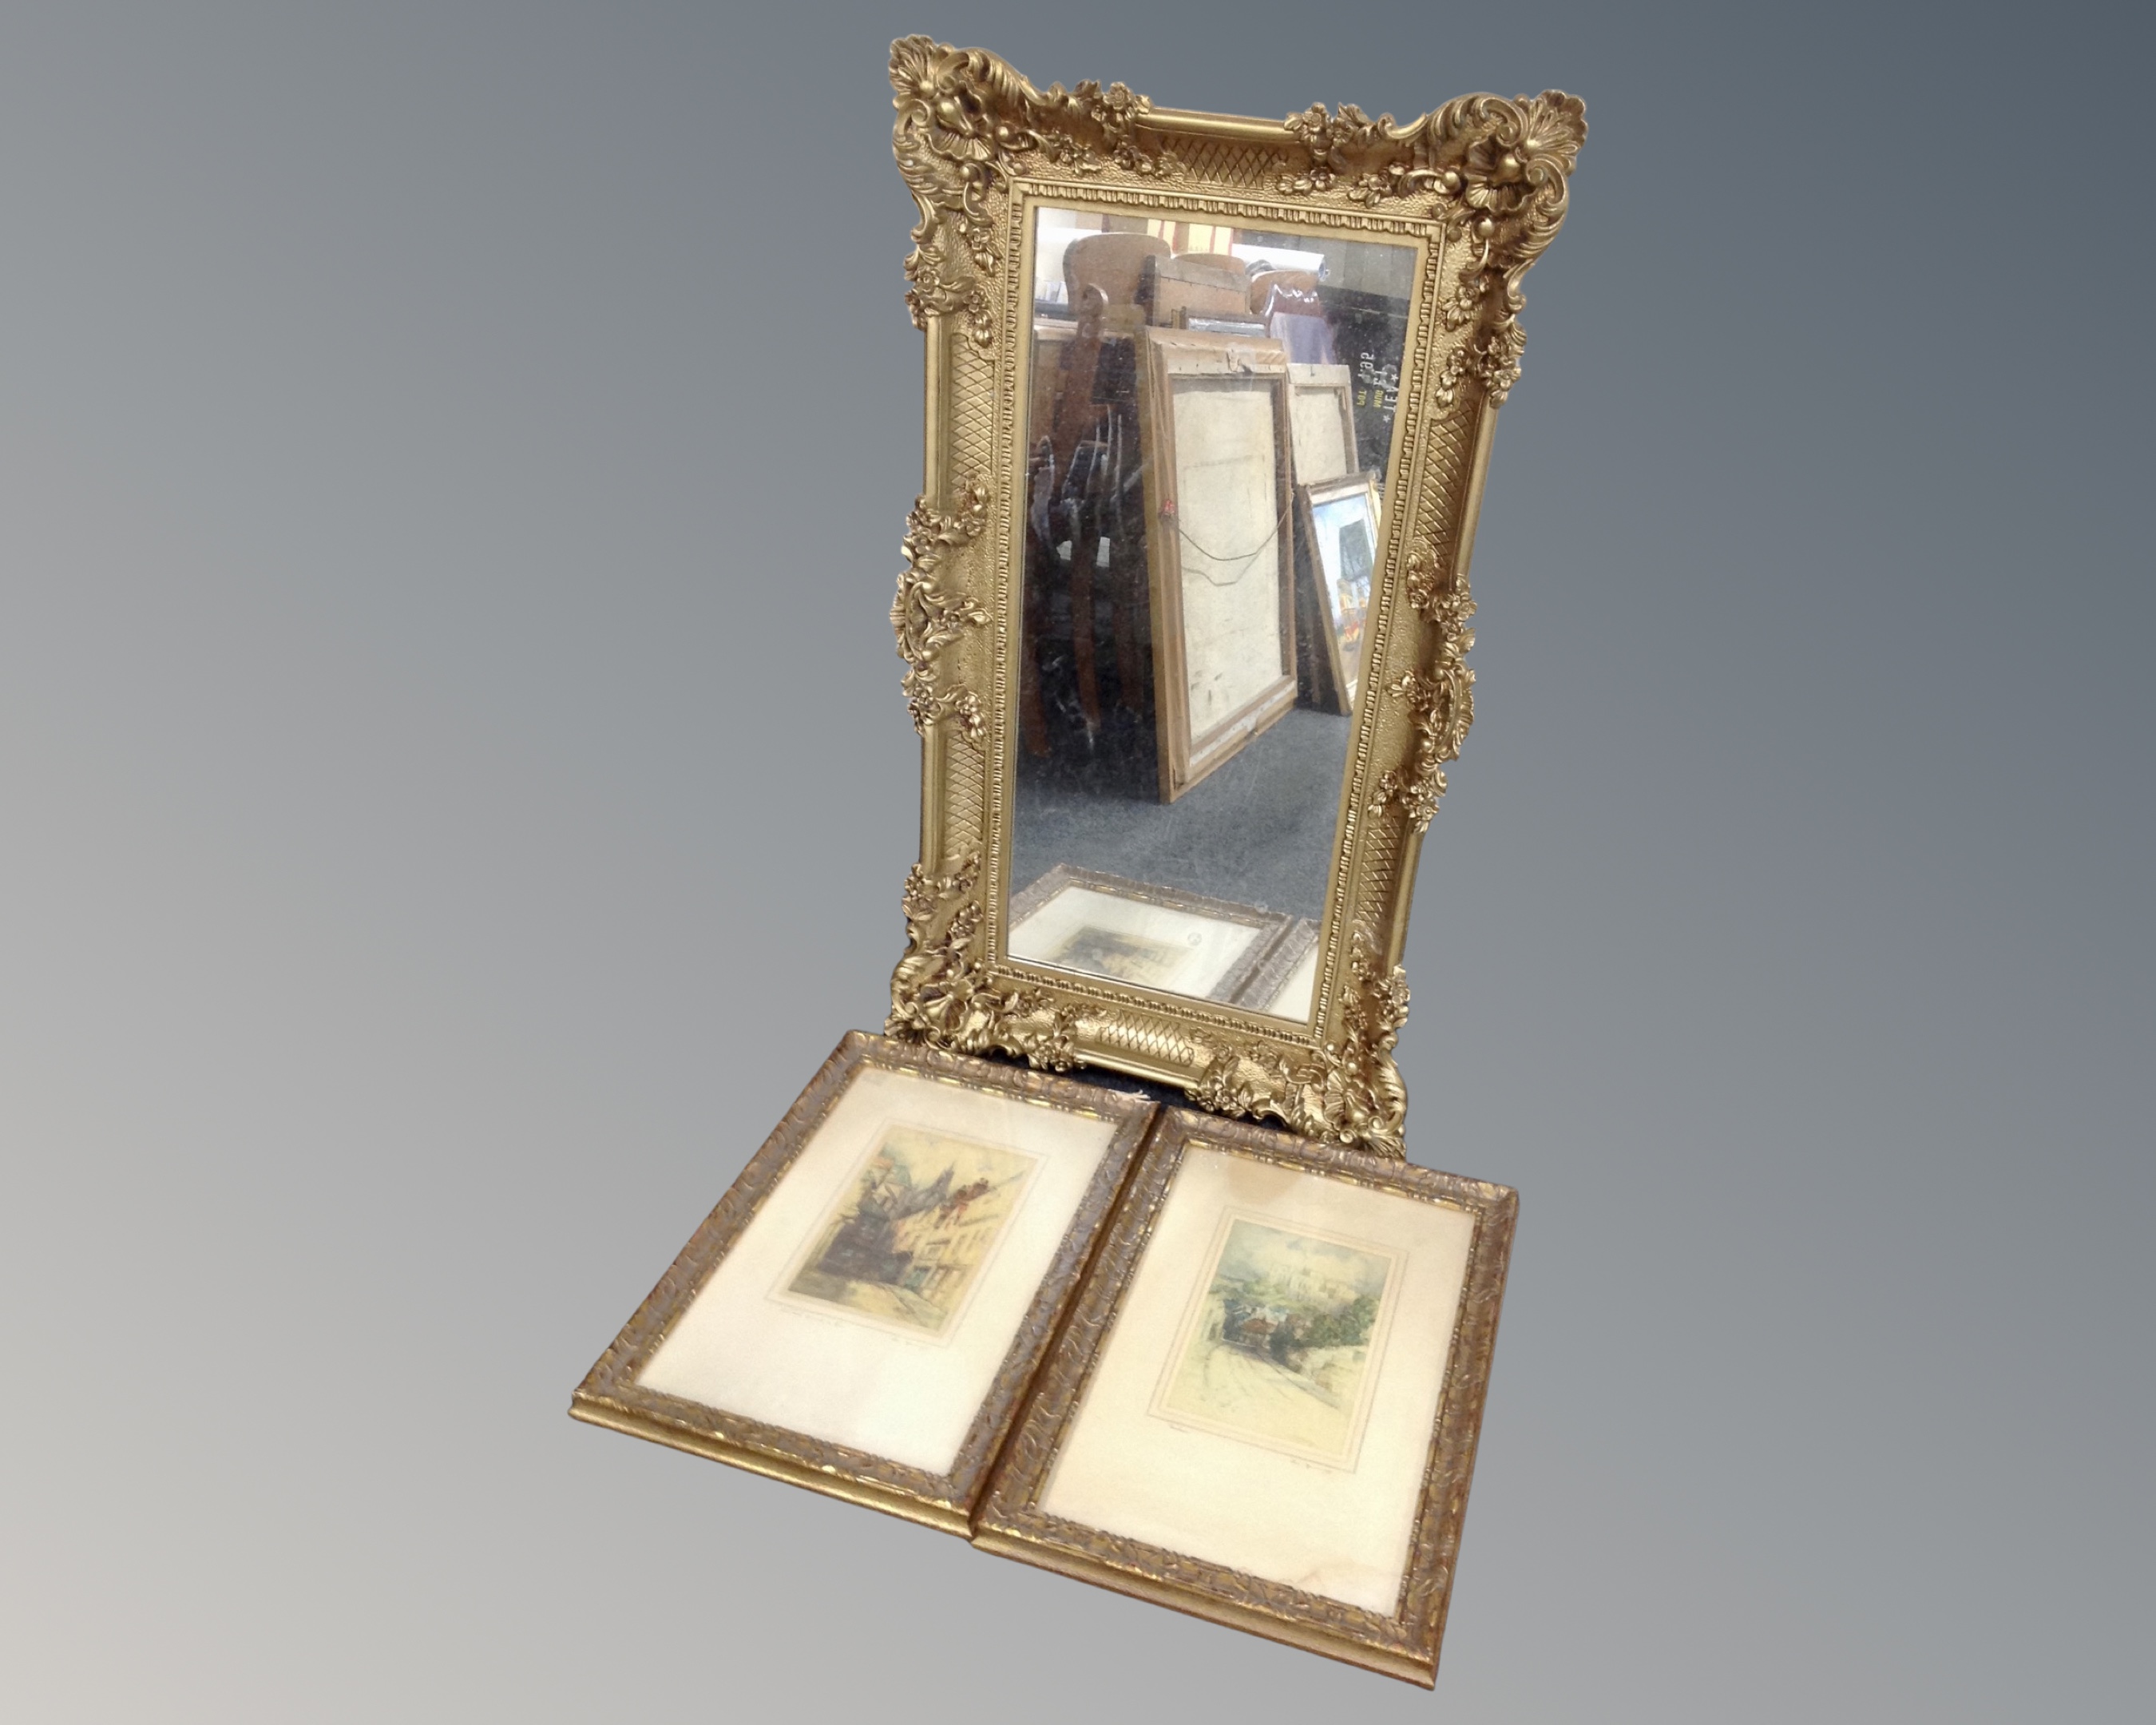 An ornate gilt framed mirror together with a pair of signed prints 'Durham' in gilt frames